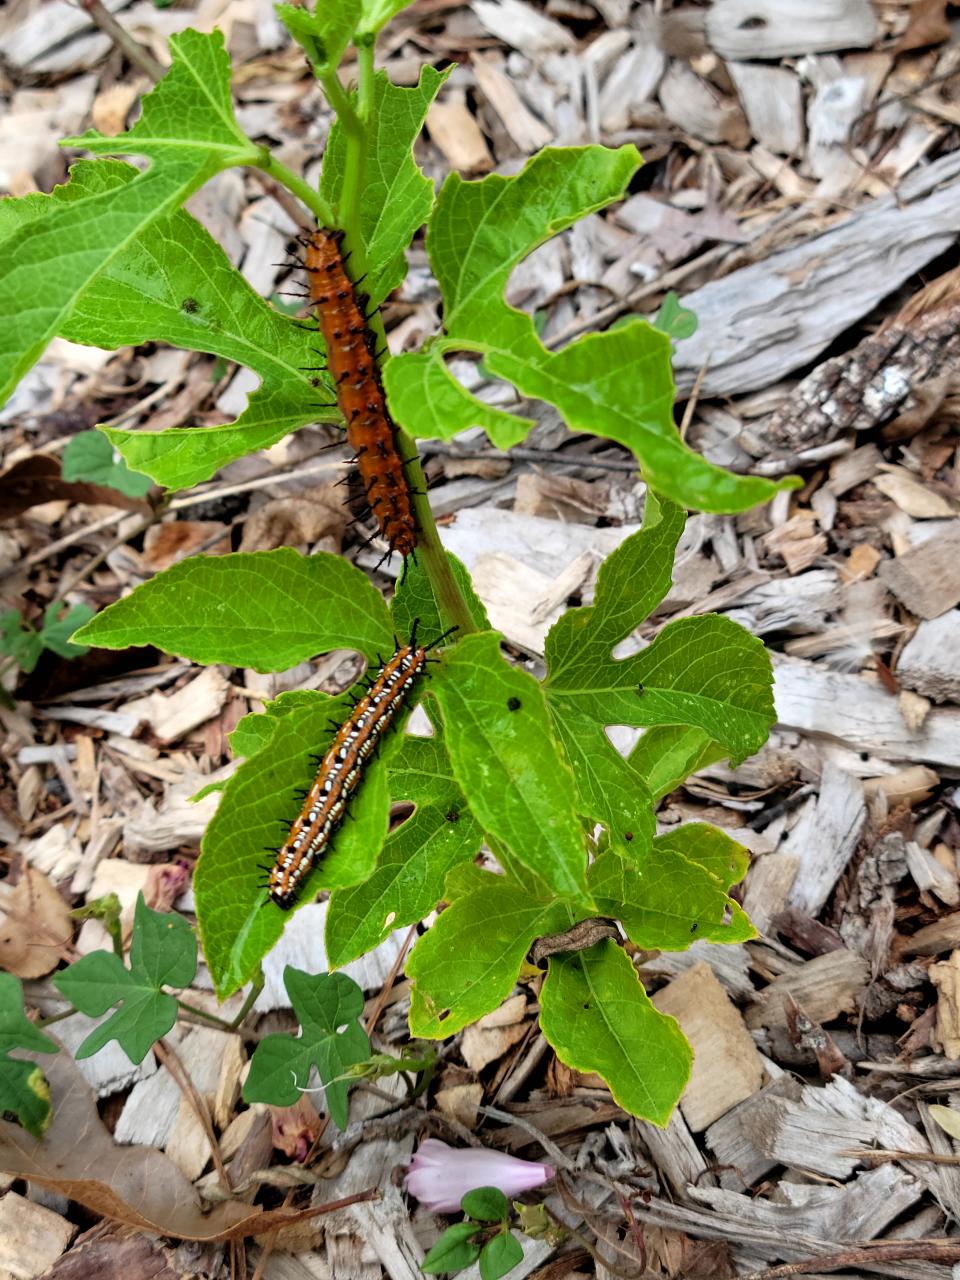 Supporting native pollinators, like this Gulf fritillary and variegated fritillary larvae on passion vine, is crucial for maintaining biodiversity and ecosystem health.